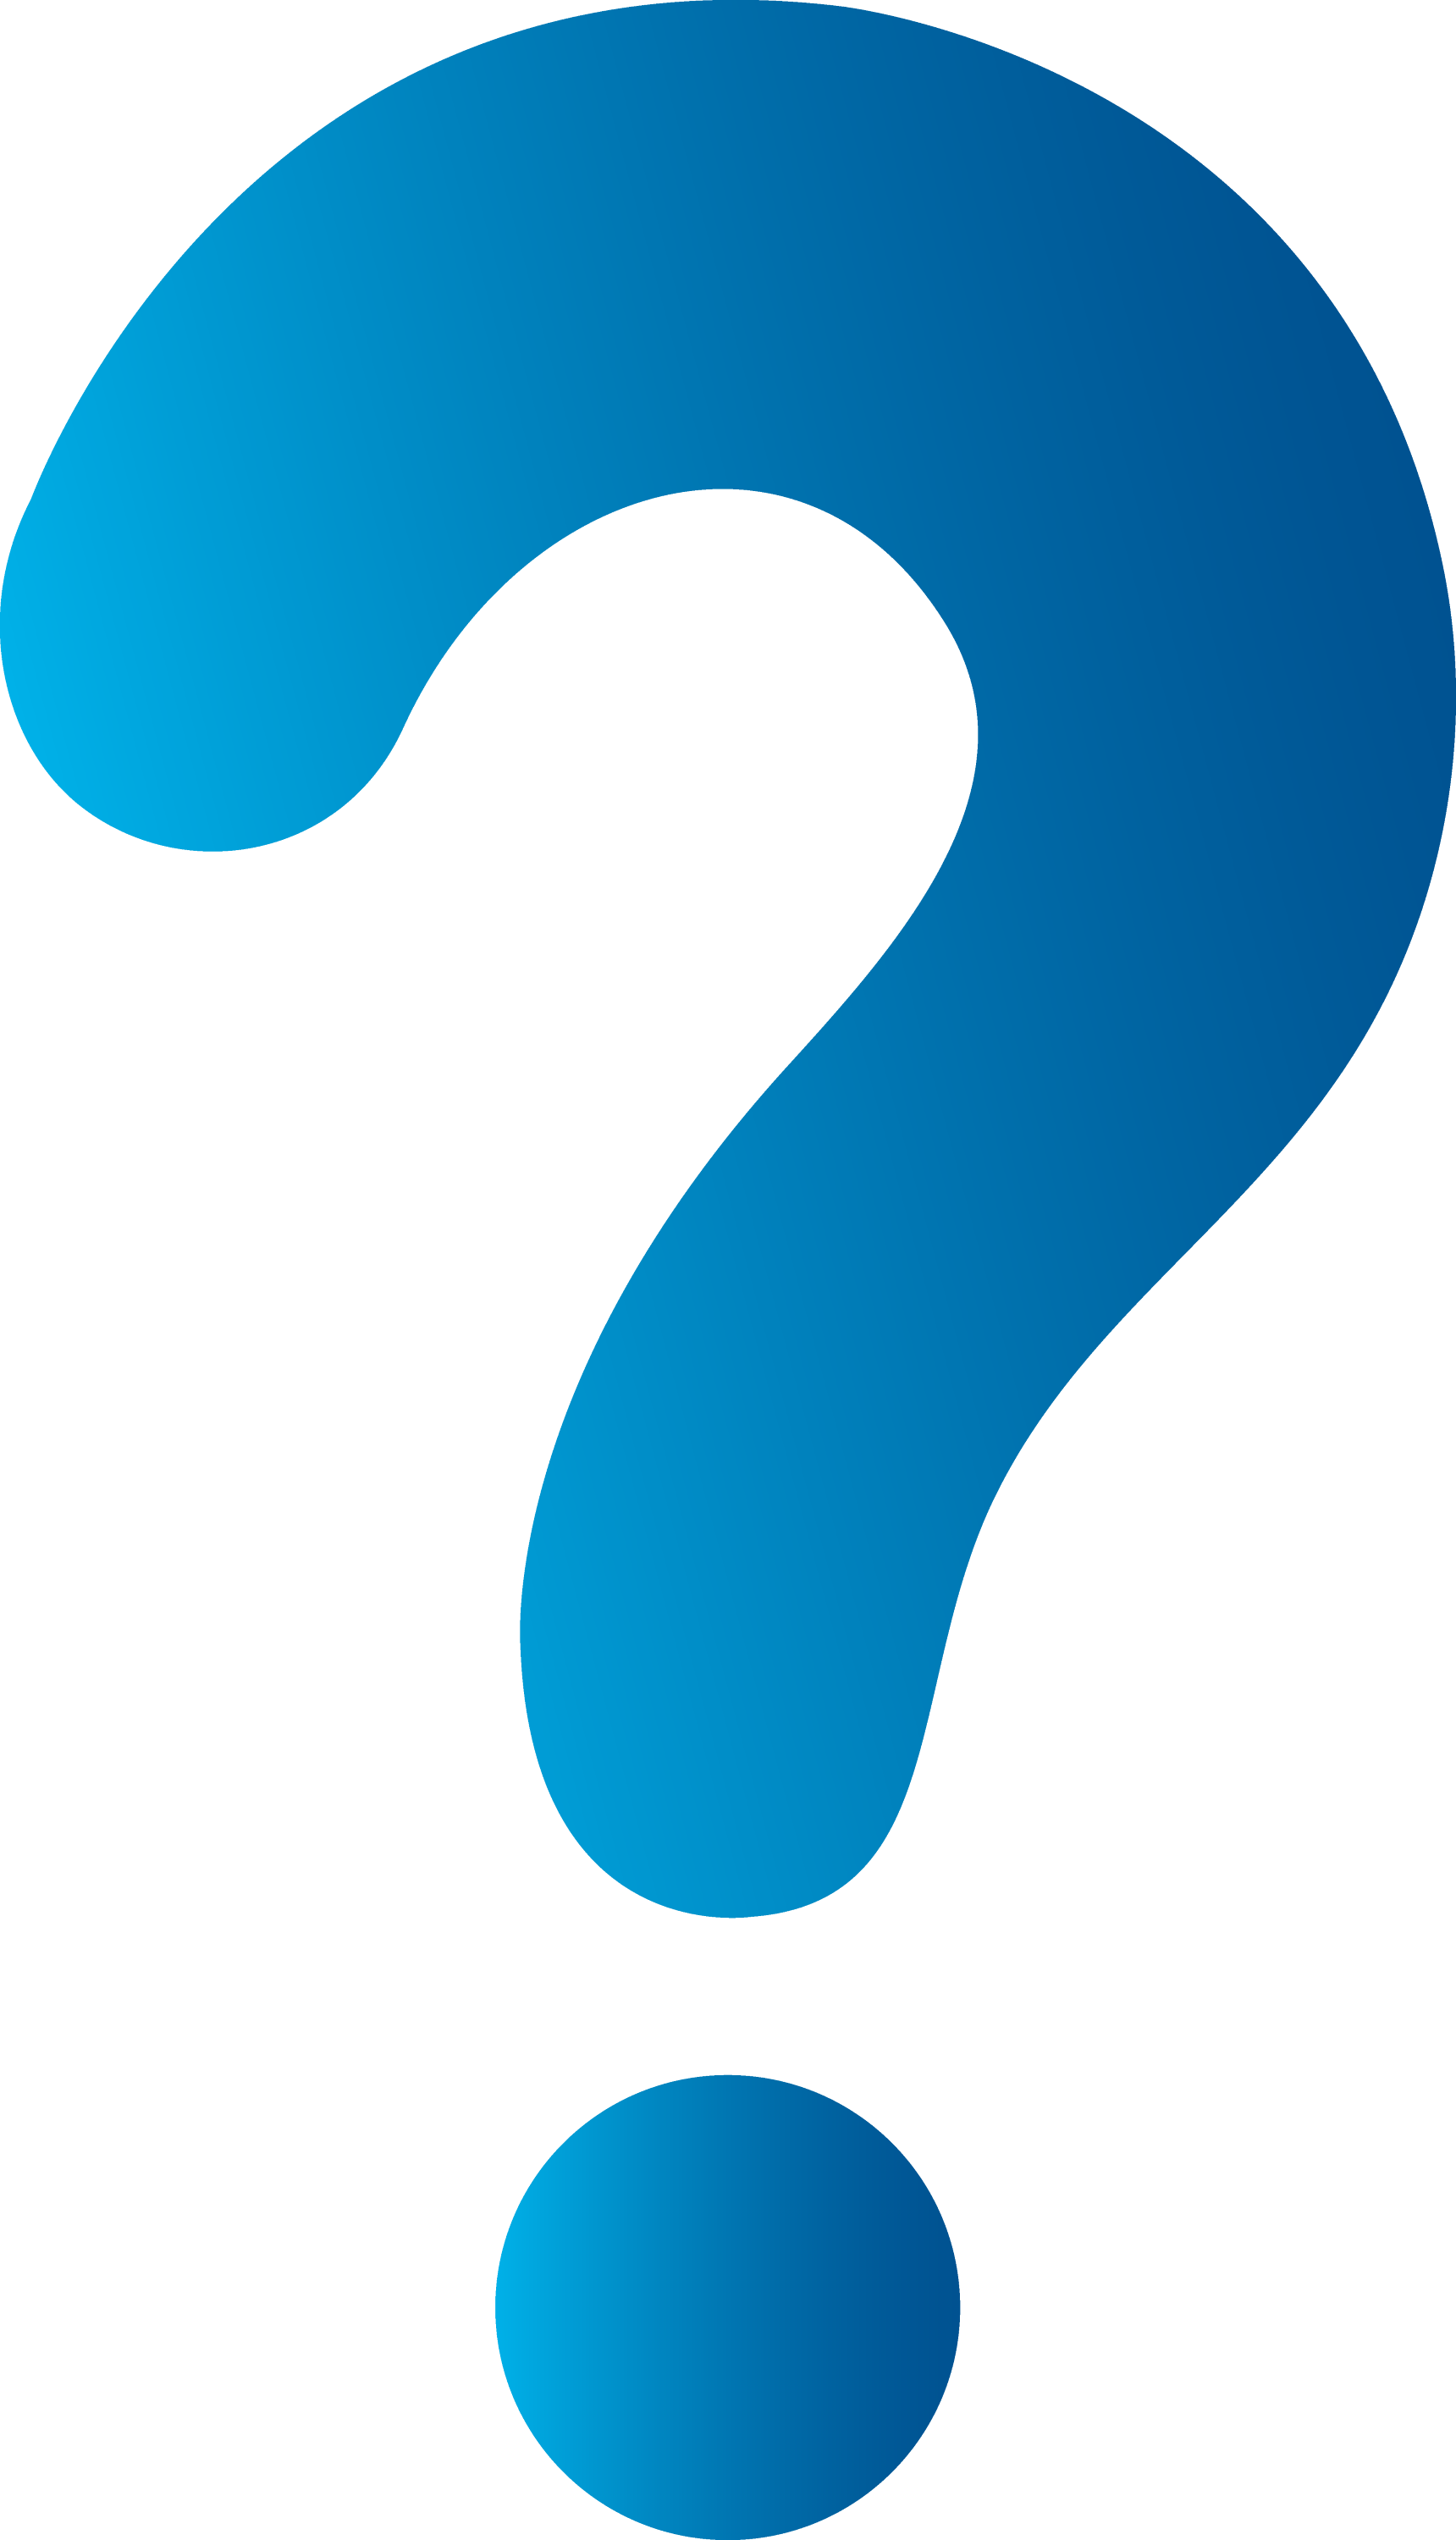 free clip art of question mark - photo #19